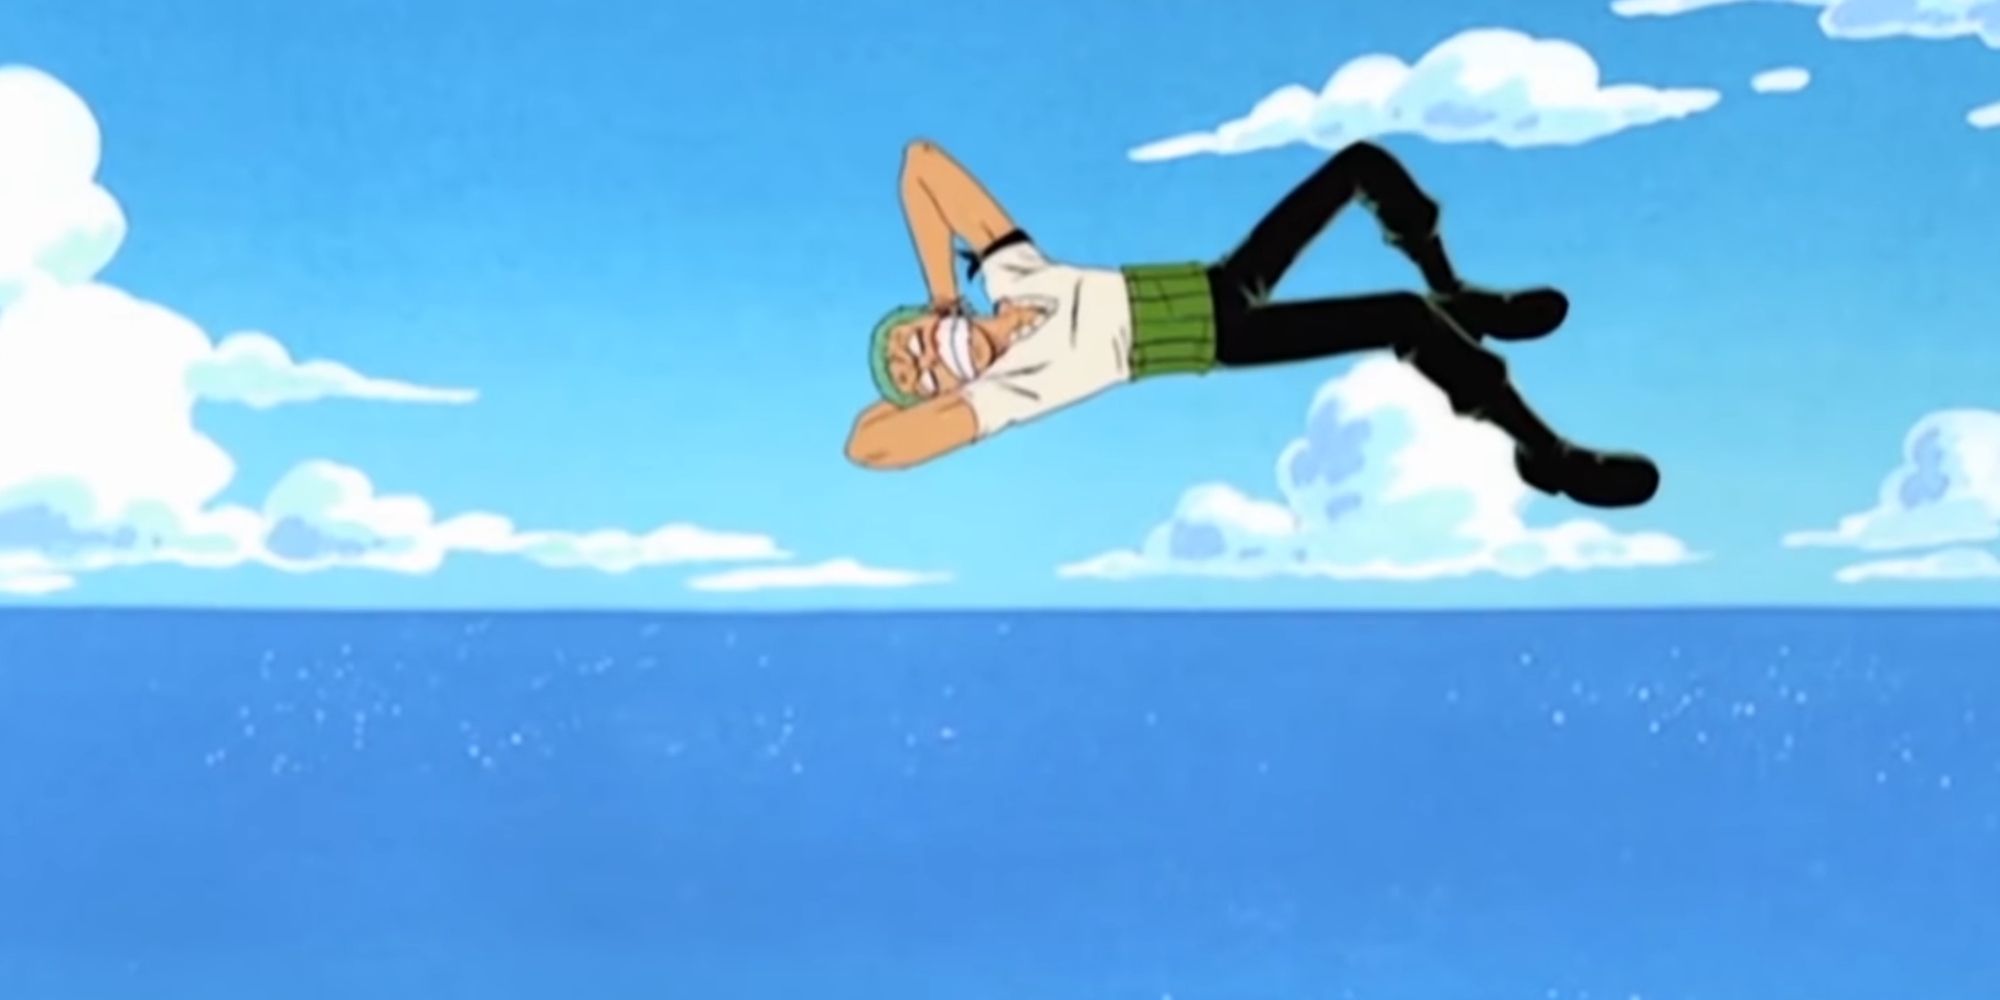 One Piece Zoro thrown off the ship